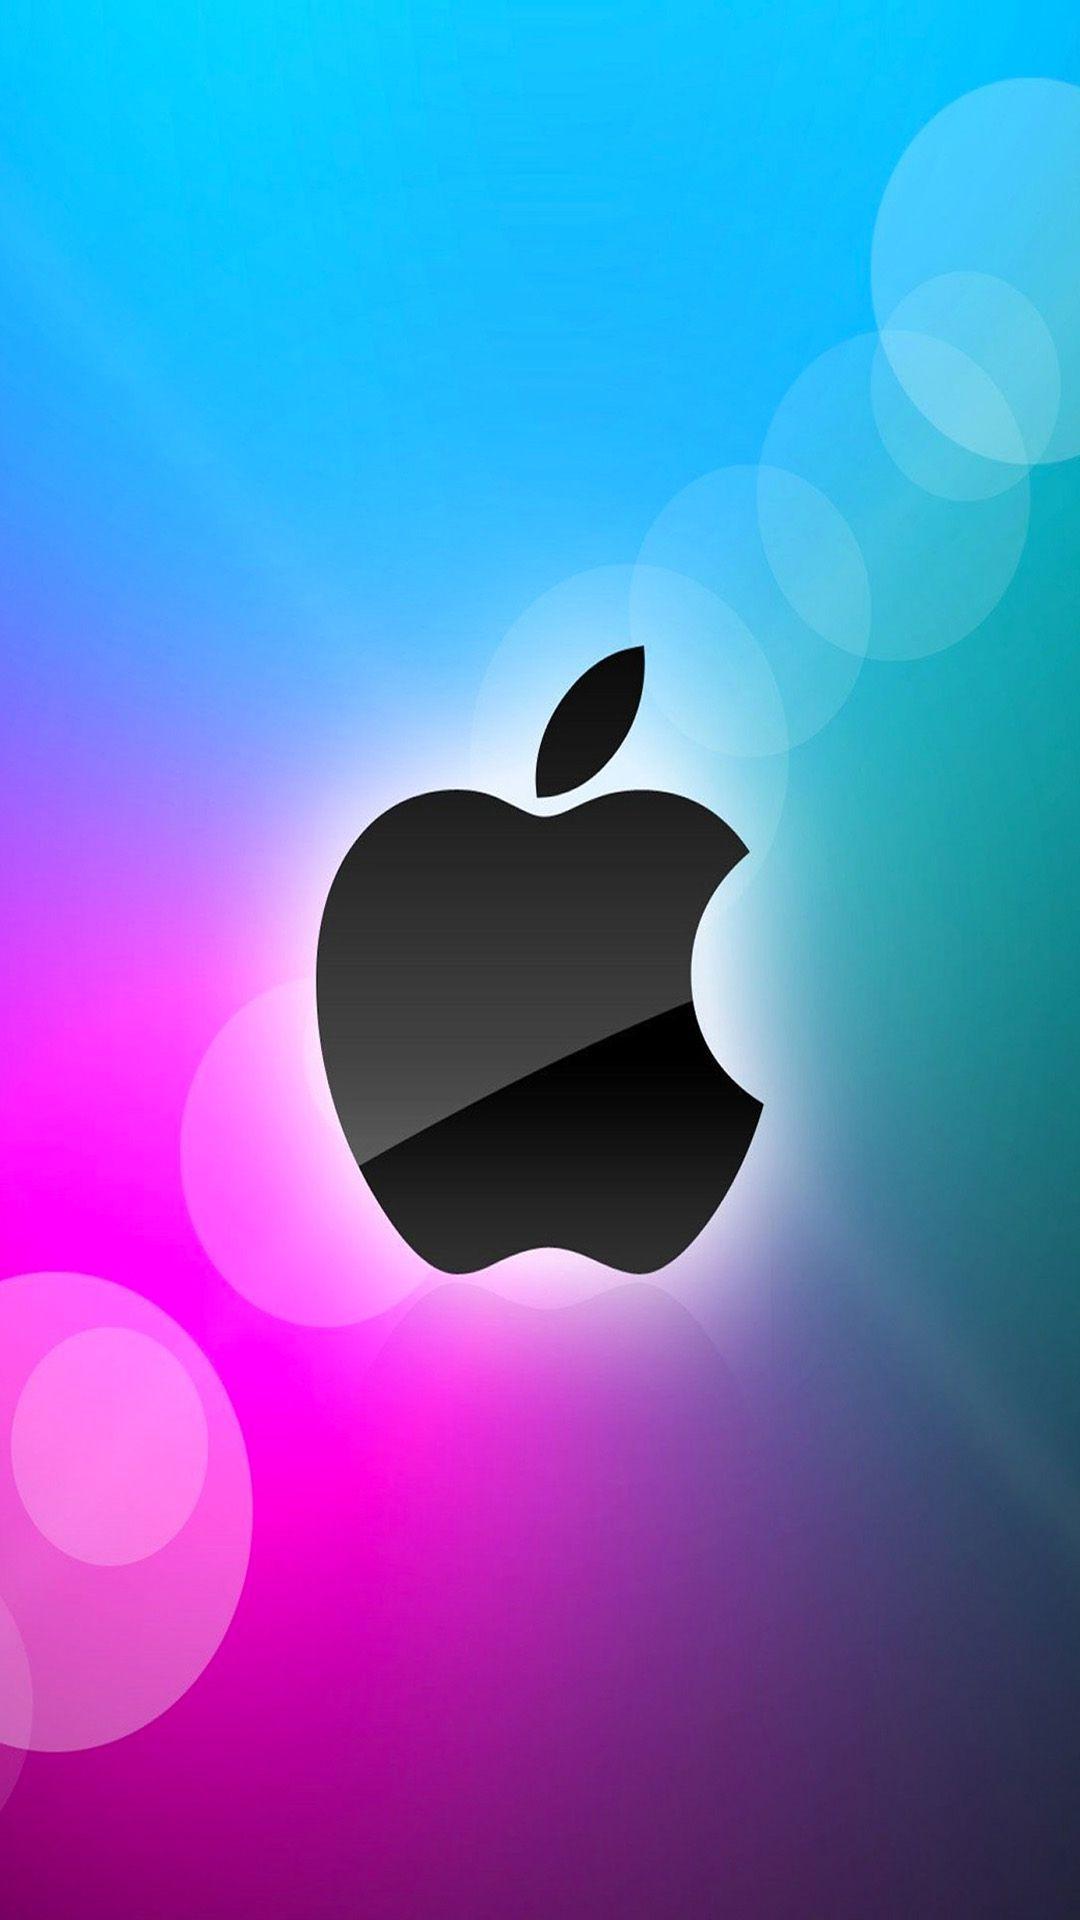 Full HD Wallpapers Of Apple Mobile - Wallpaper Cave